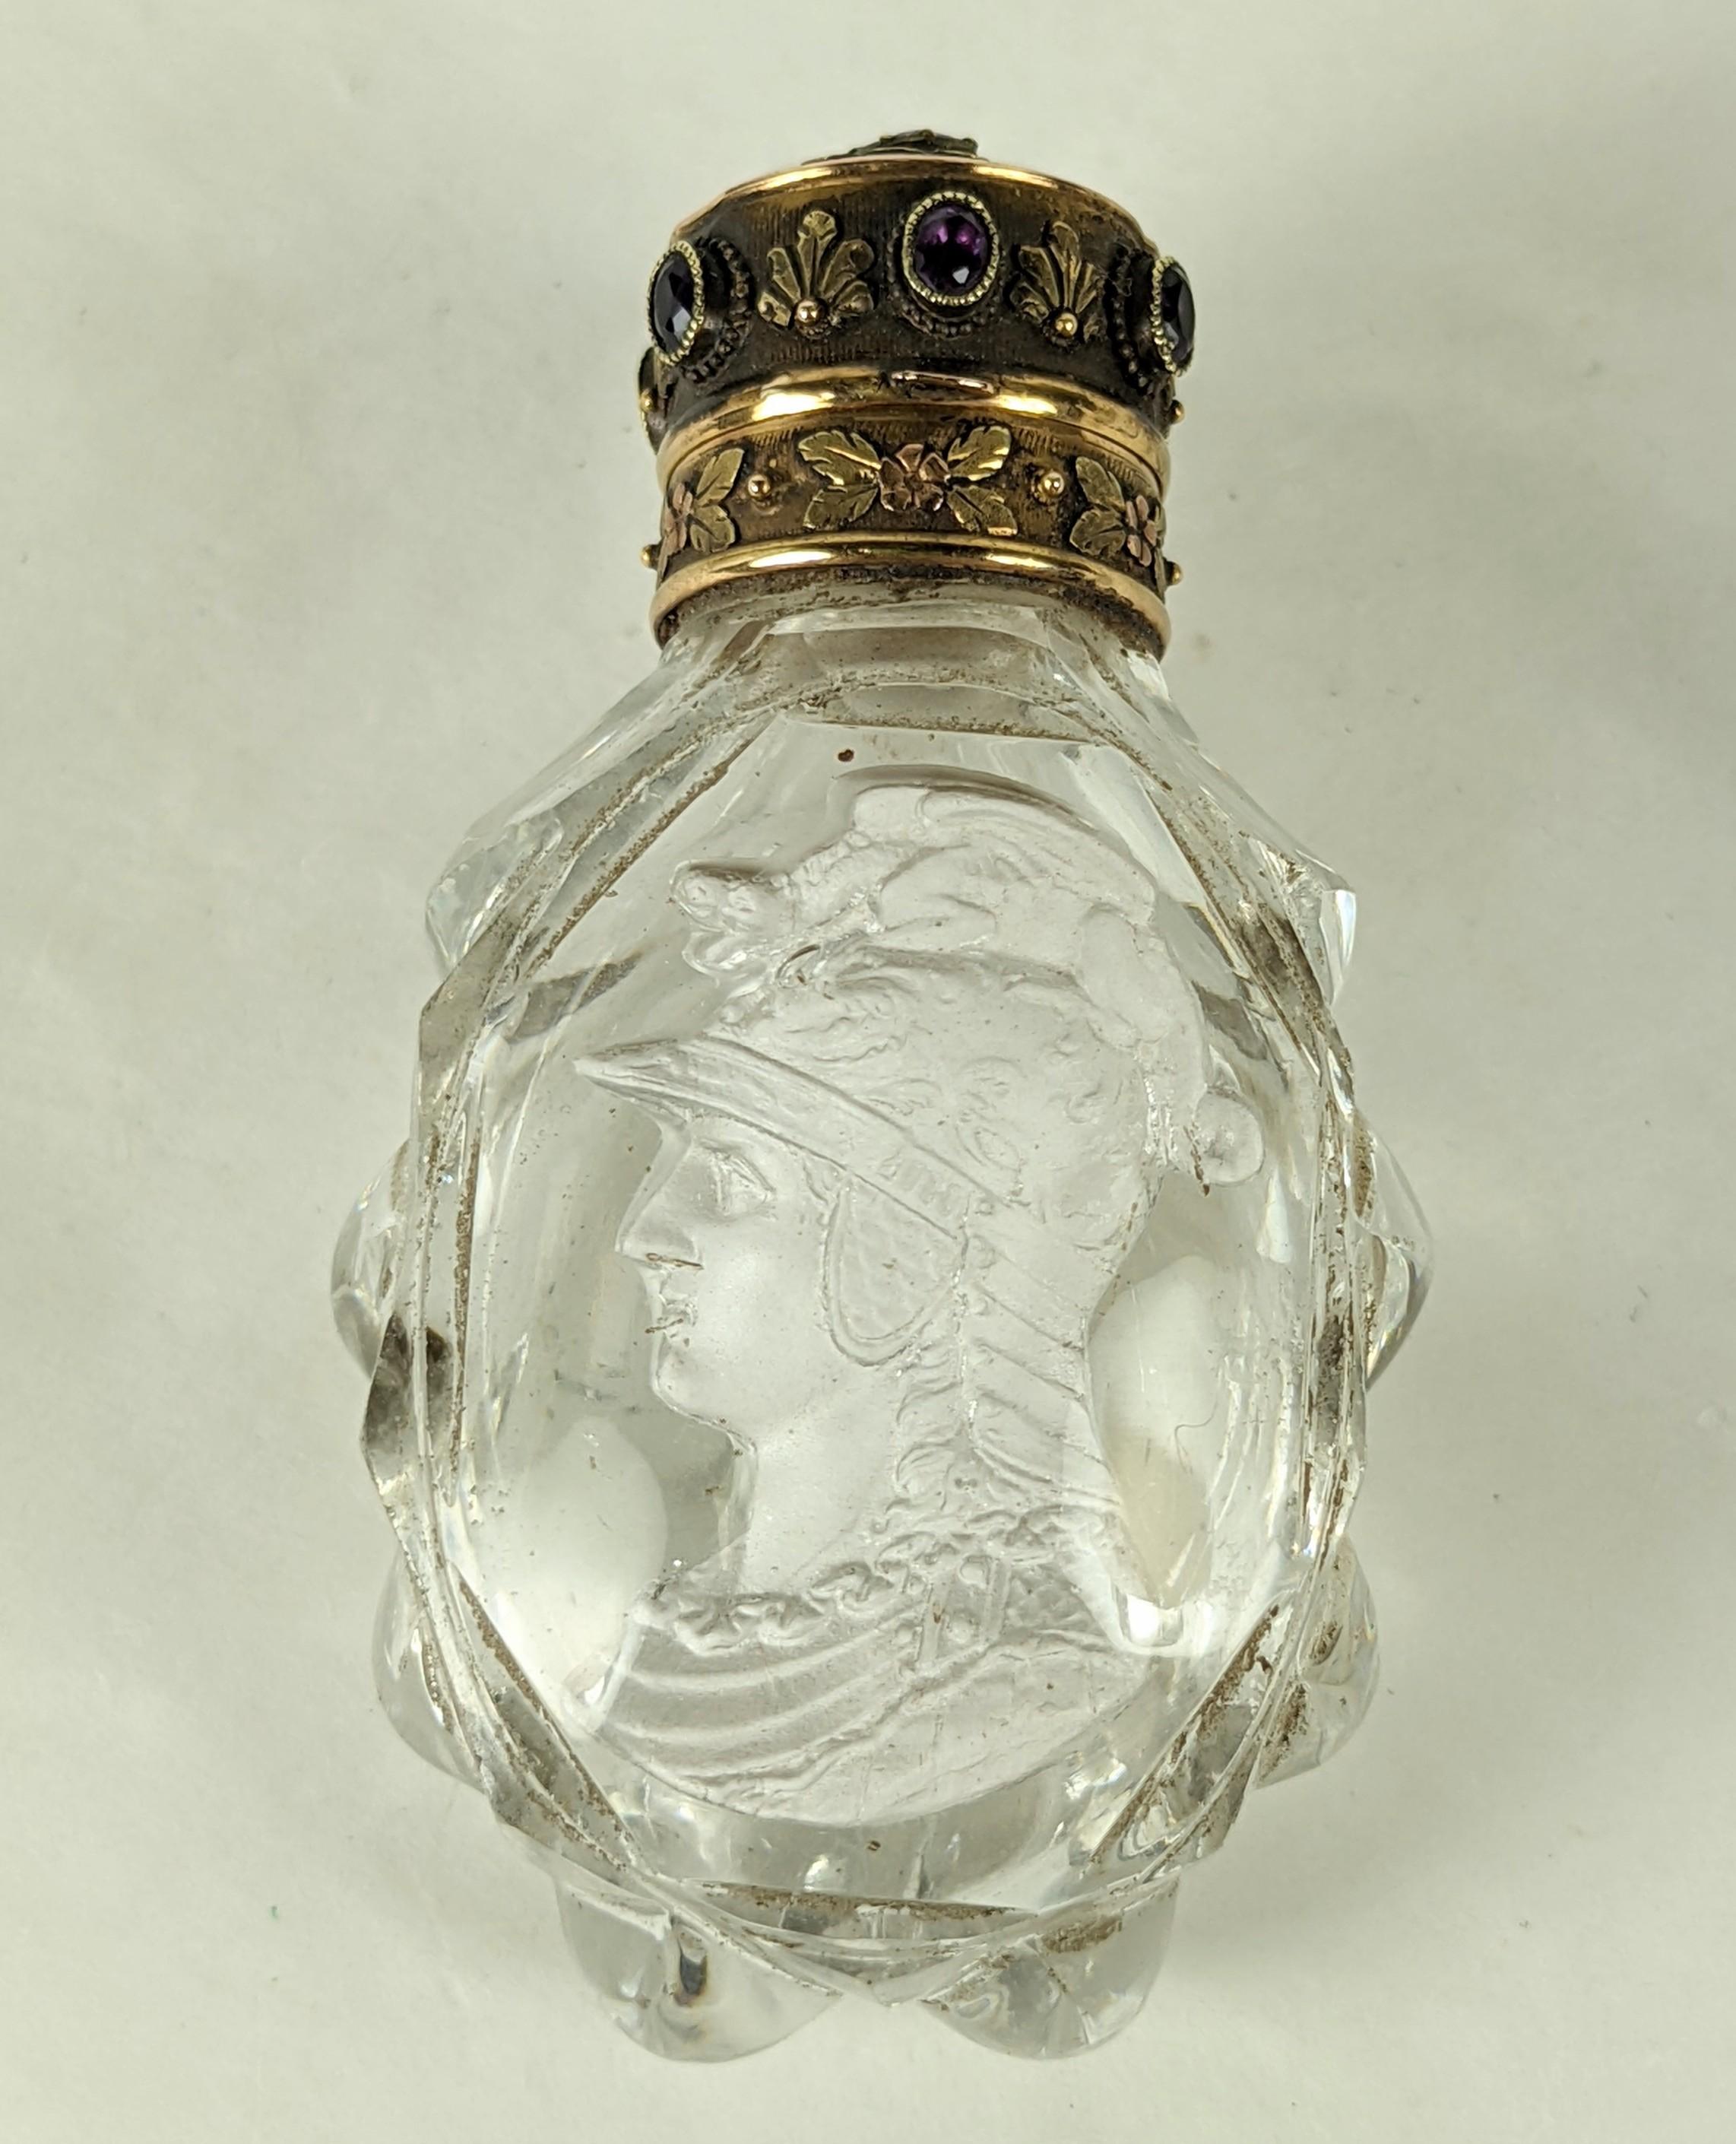 Amythest and 18k Tri Color Gold Sulphide Cameo Scent Bottle on Stand, early 19th Century, possibly by Baccarat. A custom made period stand in sterling allows the bottle to be displayed and displayed upright. Wonderful early sulphide cameo of a